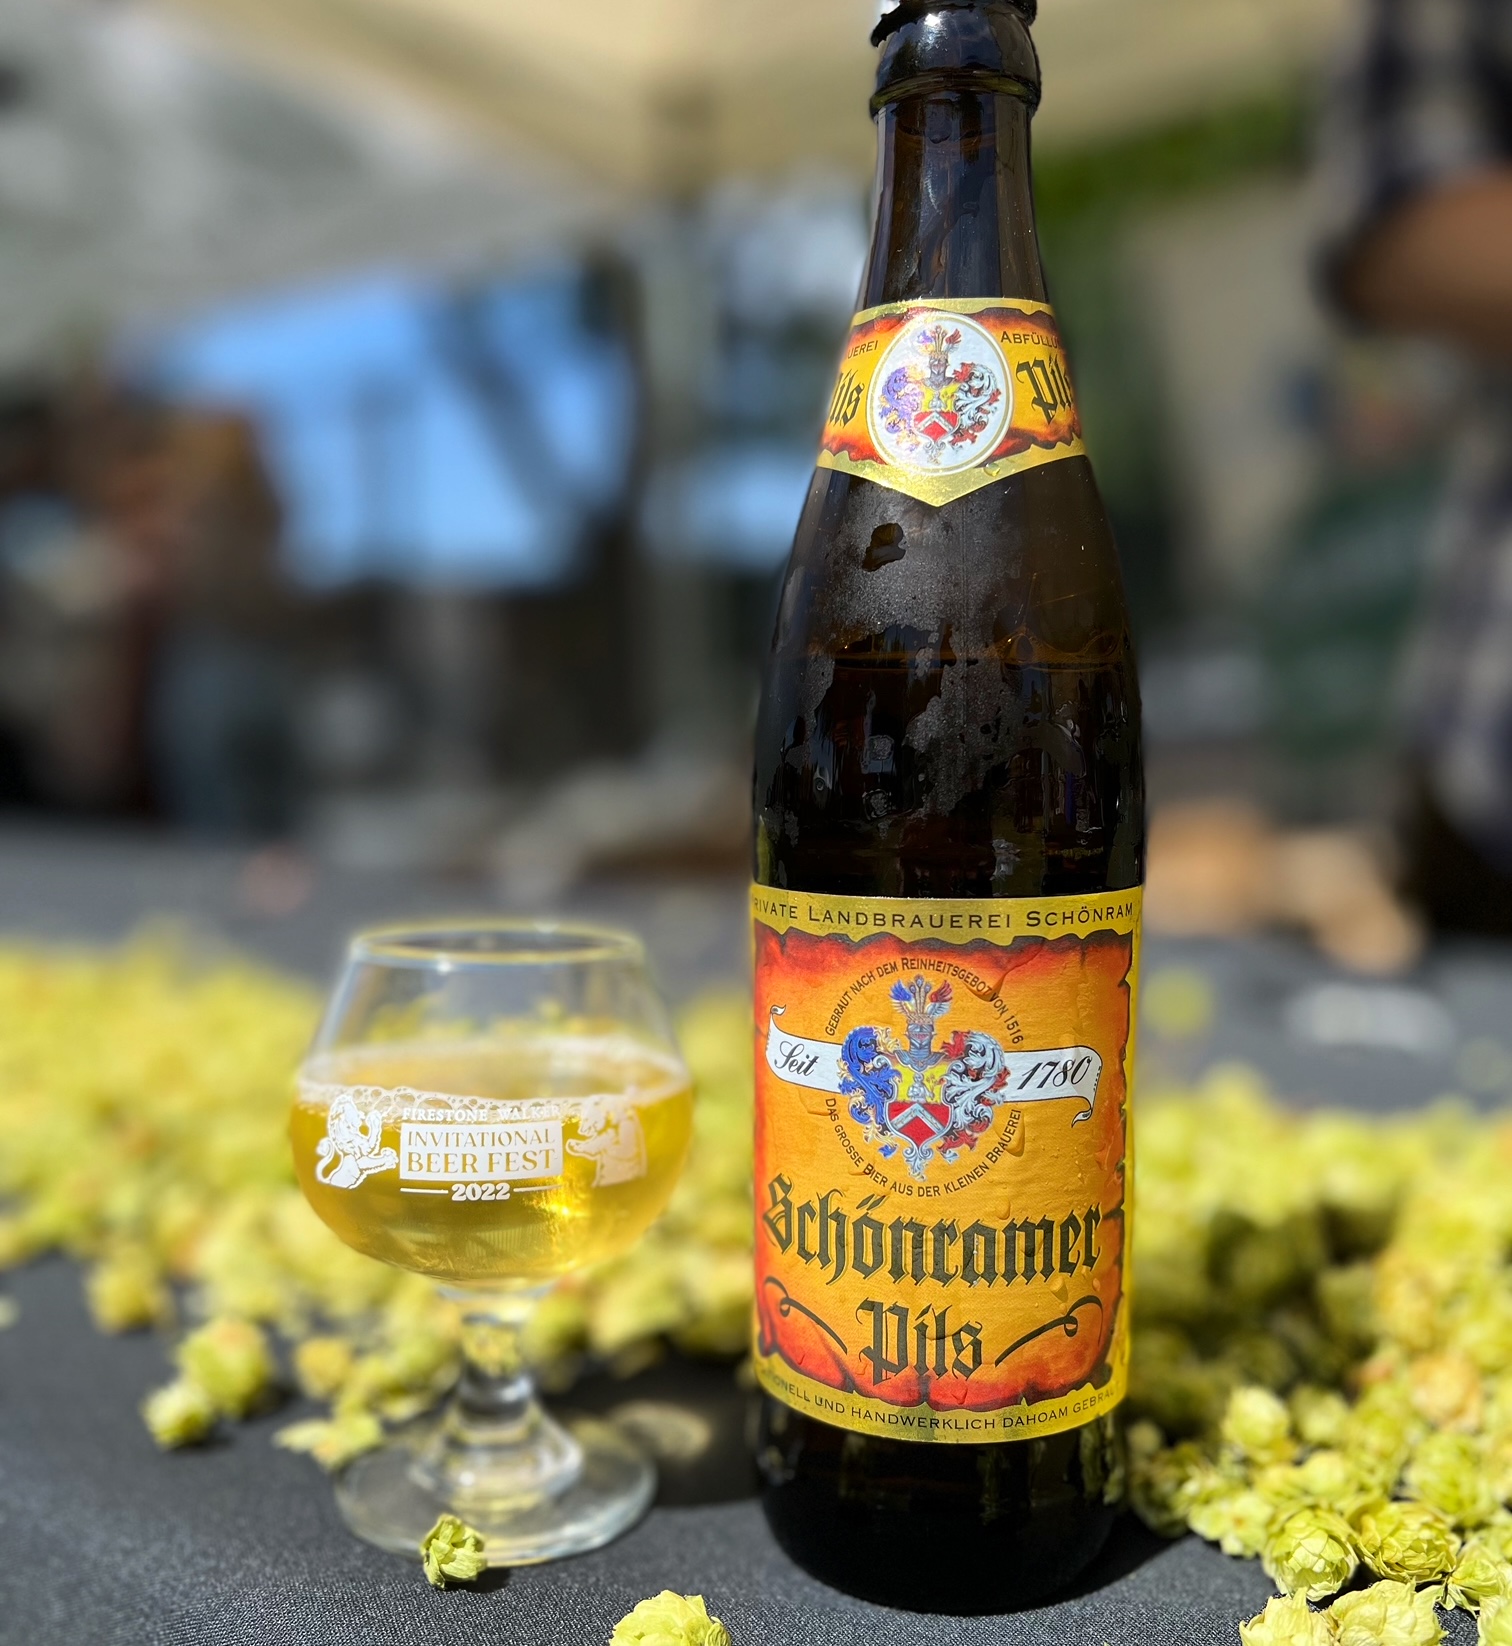 A highlight from attending the 2022 Firestone Walker Invitational Beer Fest was sampling beers from the international breweries. This Schönramer Pils from Brauerei Schoenram called for a few samples!